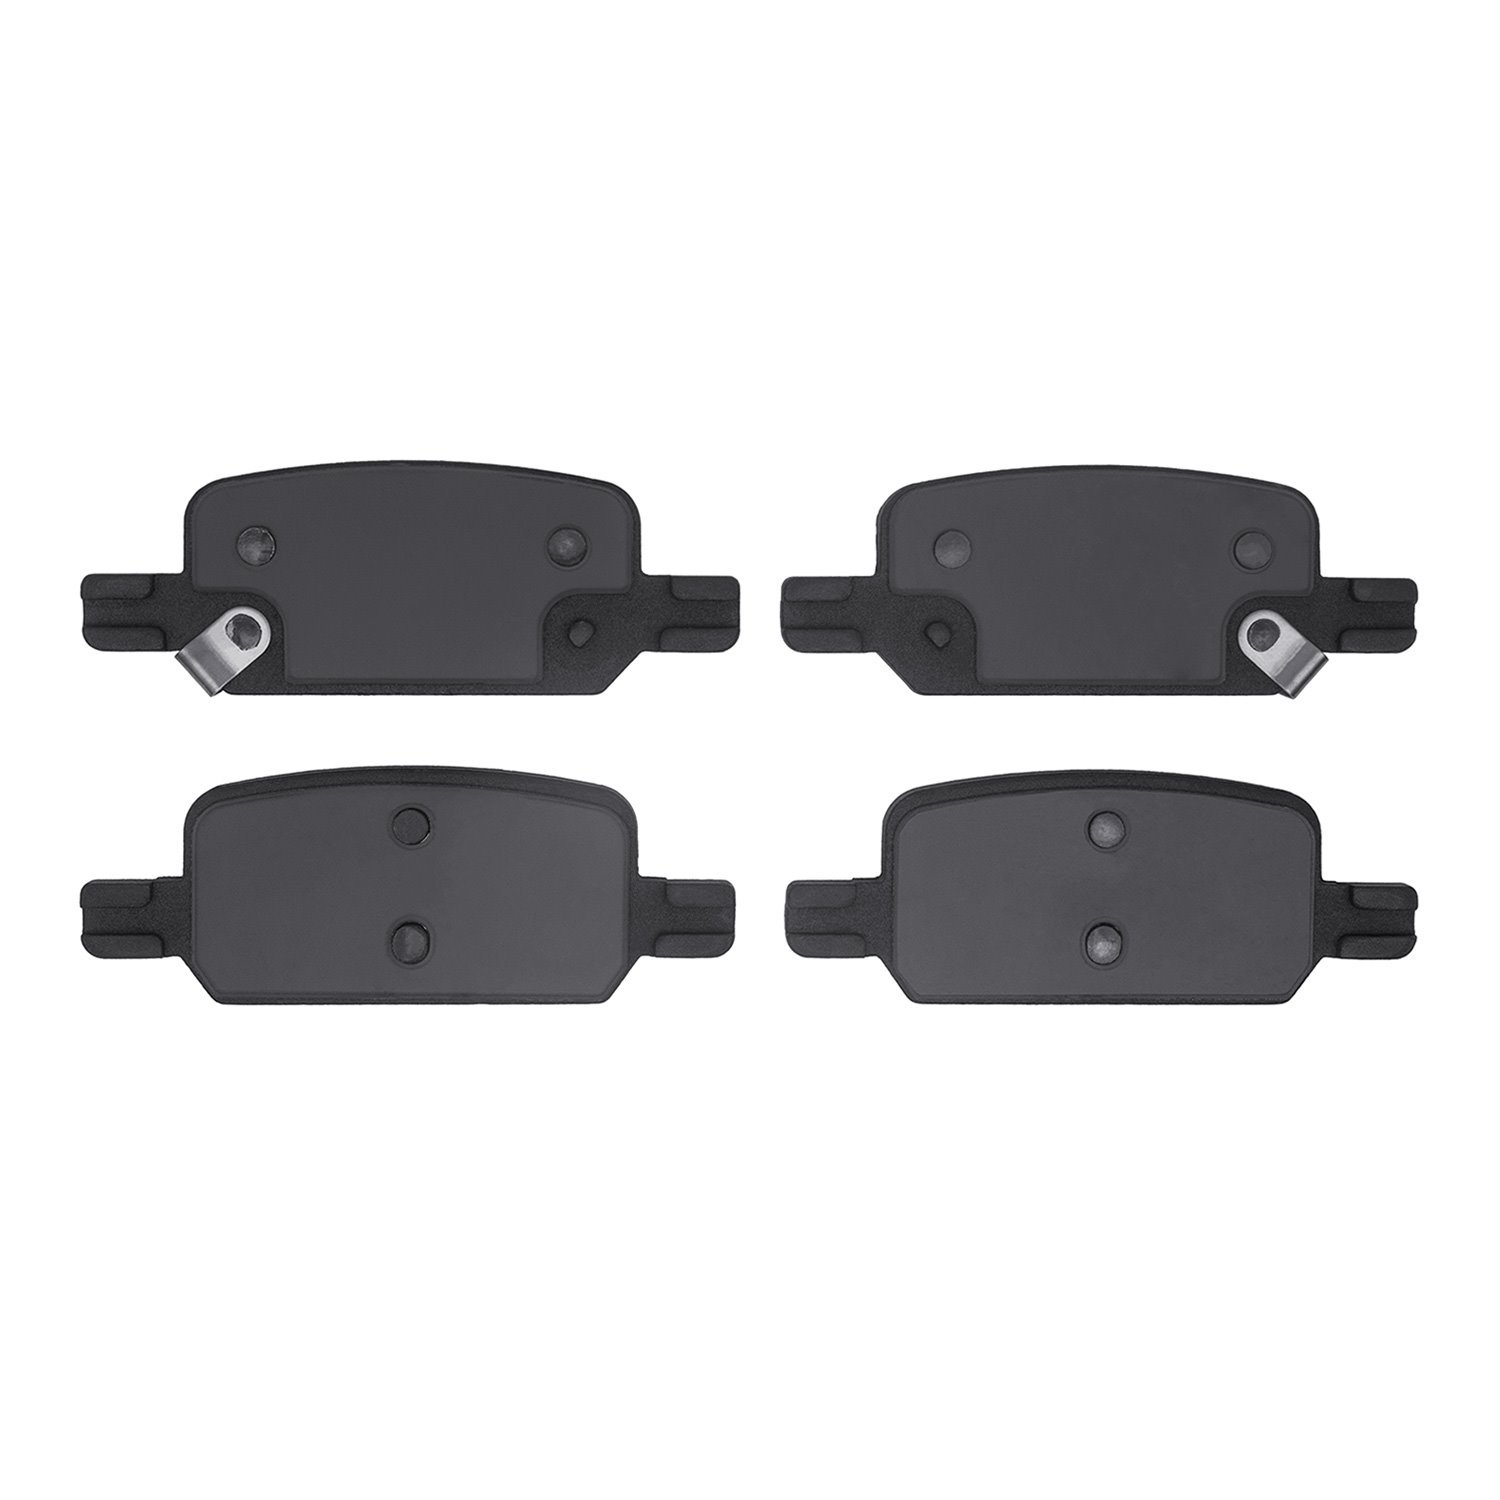 1310-2370-00 3000-Series Ceramic Brake Pads, Fits Select GM, Position: Rear